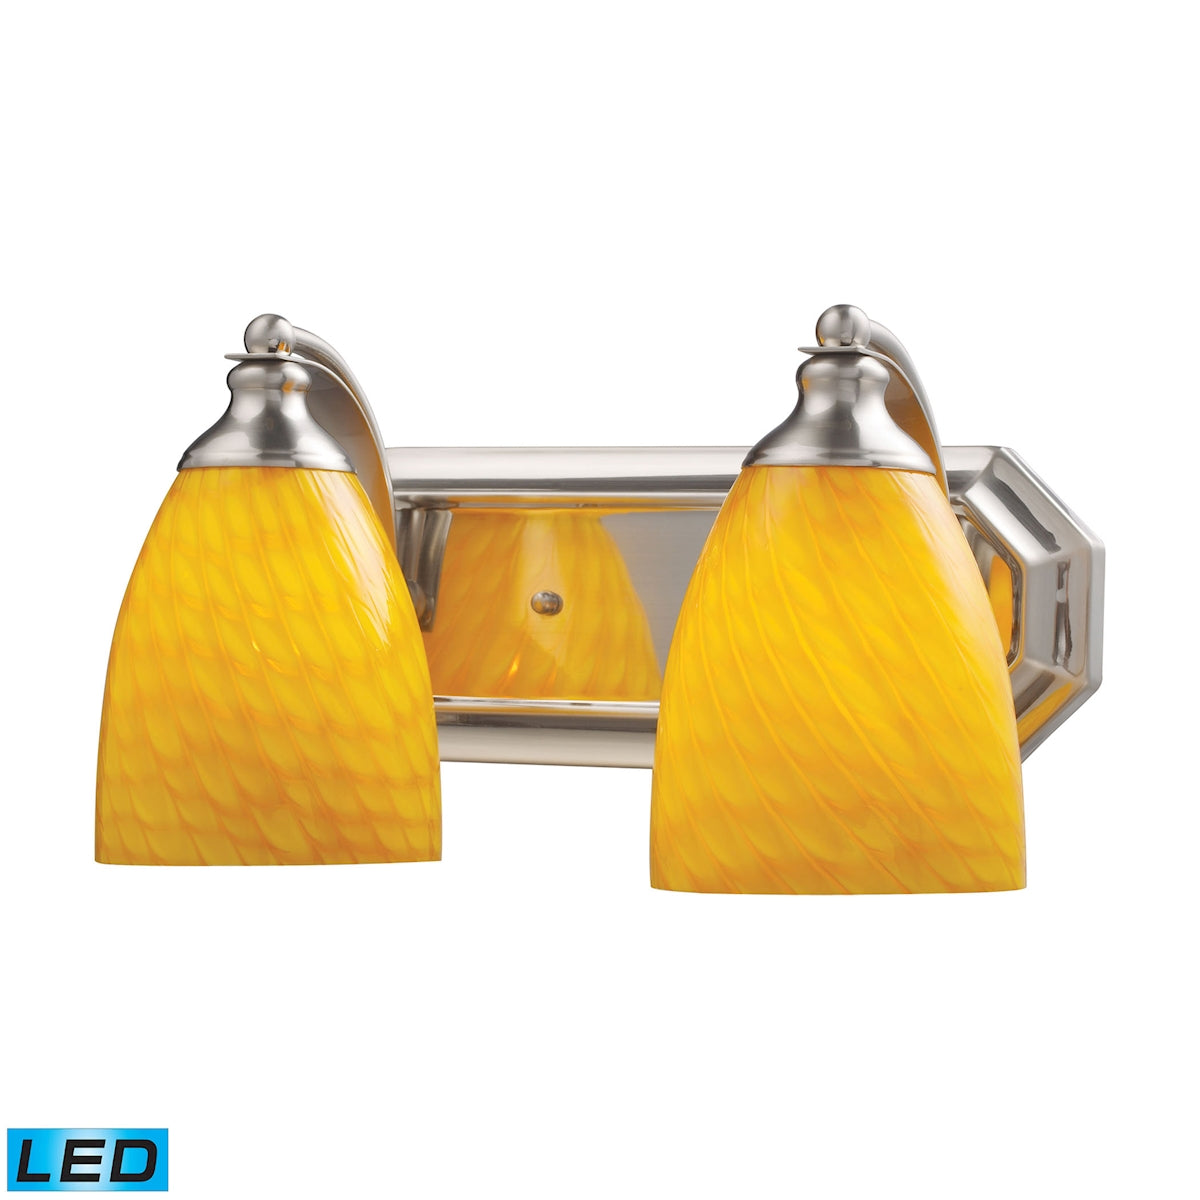 ELK Lighting 570-2N-CN-LED Mix-N-Match Vanity 2-Light Wall Lamp in Satin Nickel with Canary Glass - Includes LED Bulbs